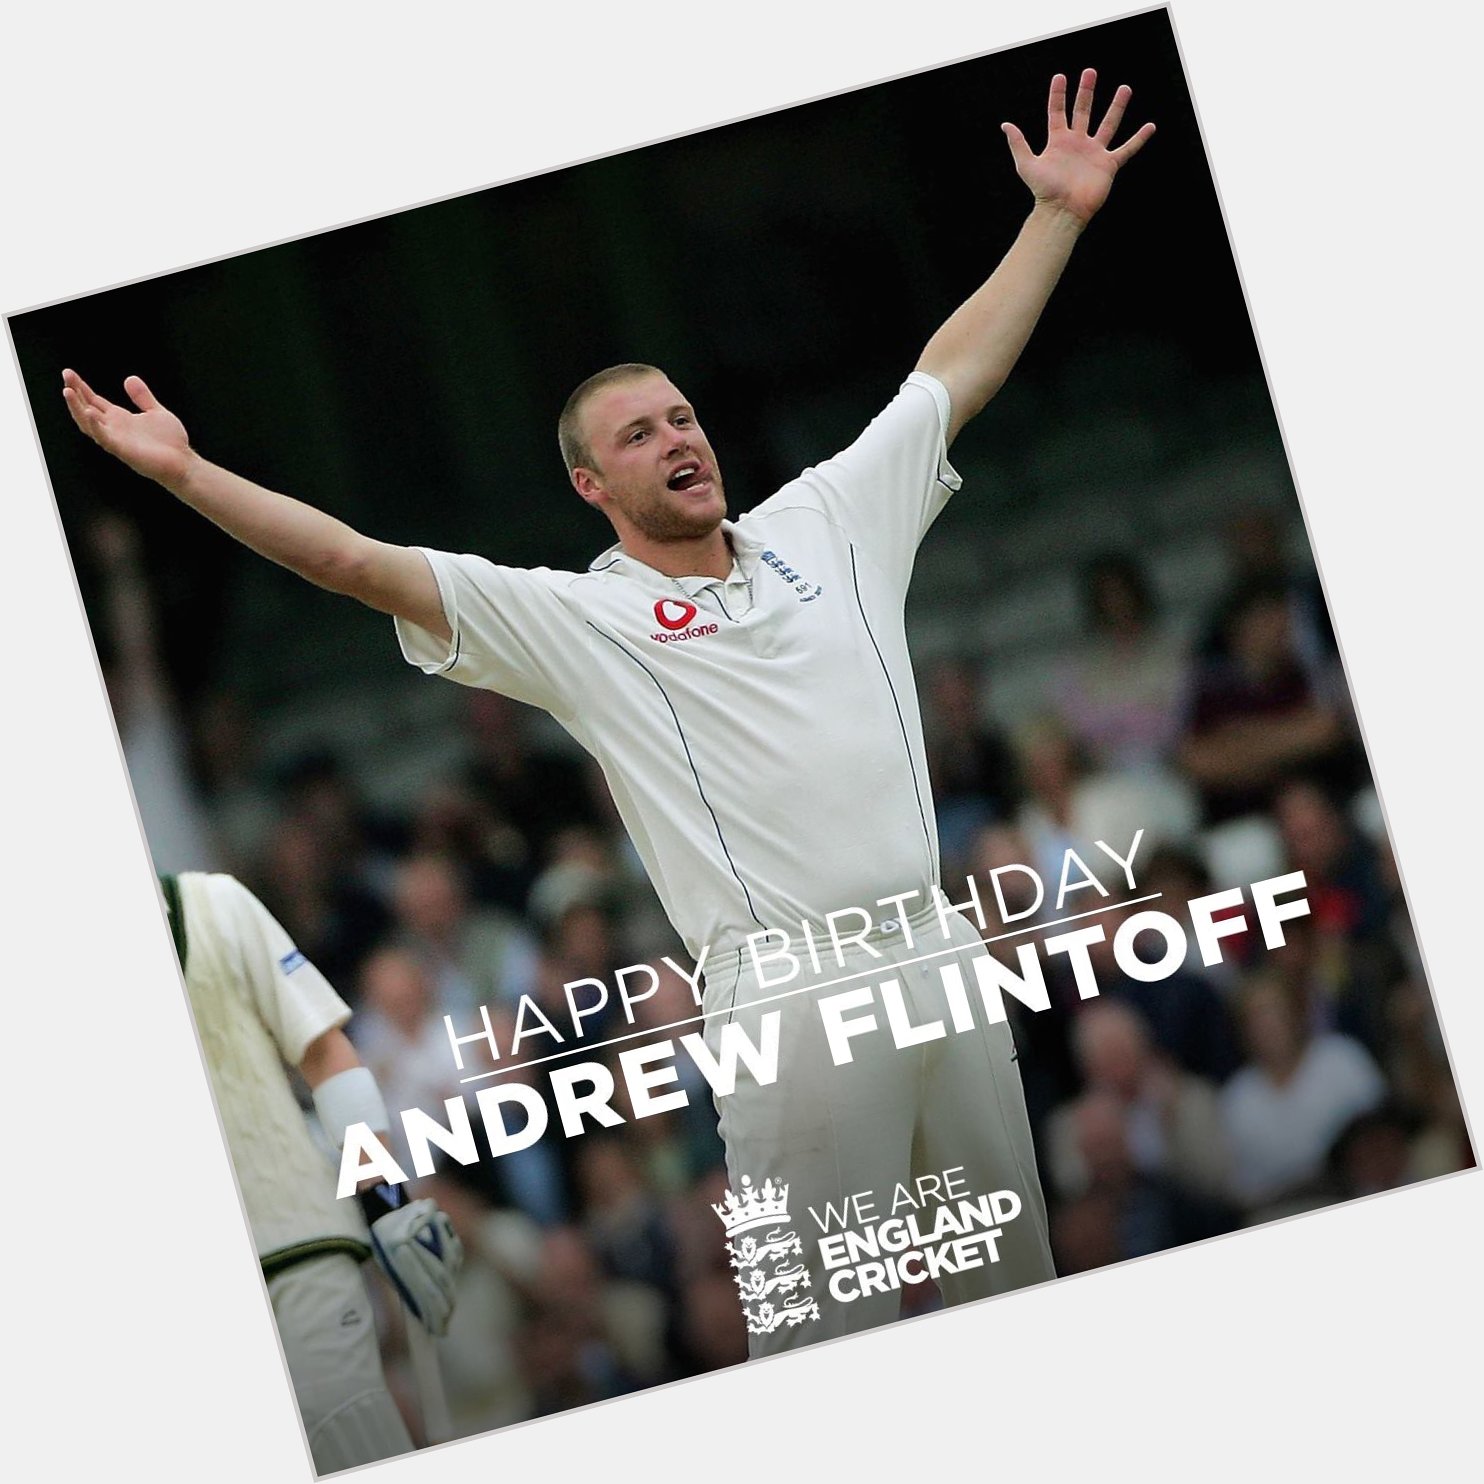 Happy Birthday Andrew Flintoff! Was a terrific player for the England cricket team! 